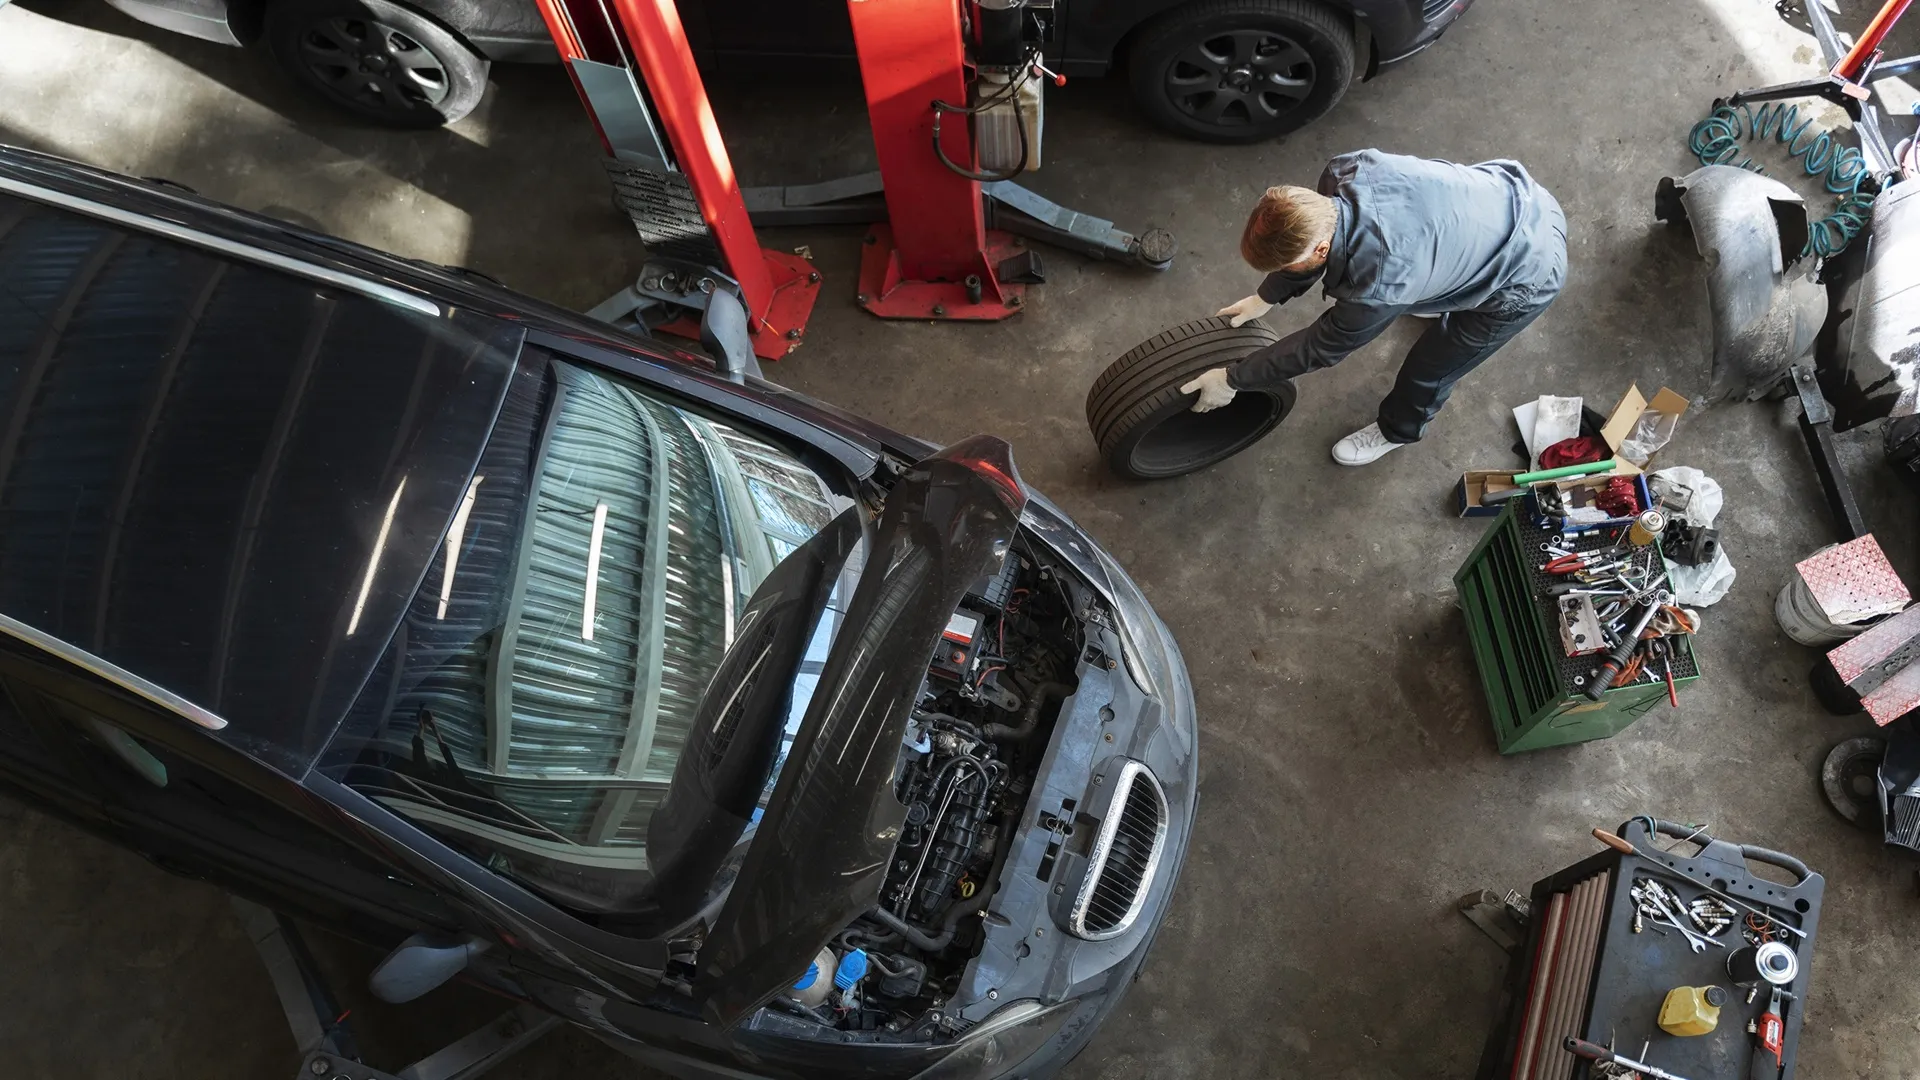 Car parts: how to save without sacrificing quality